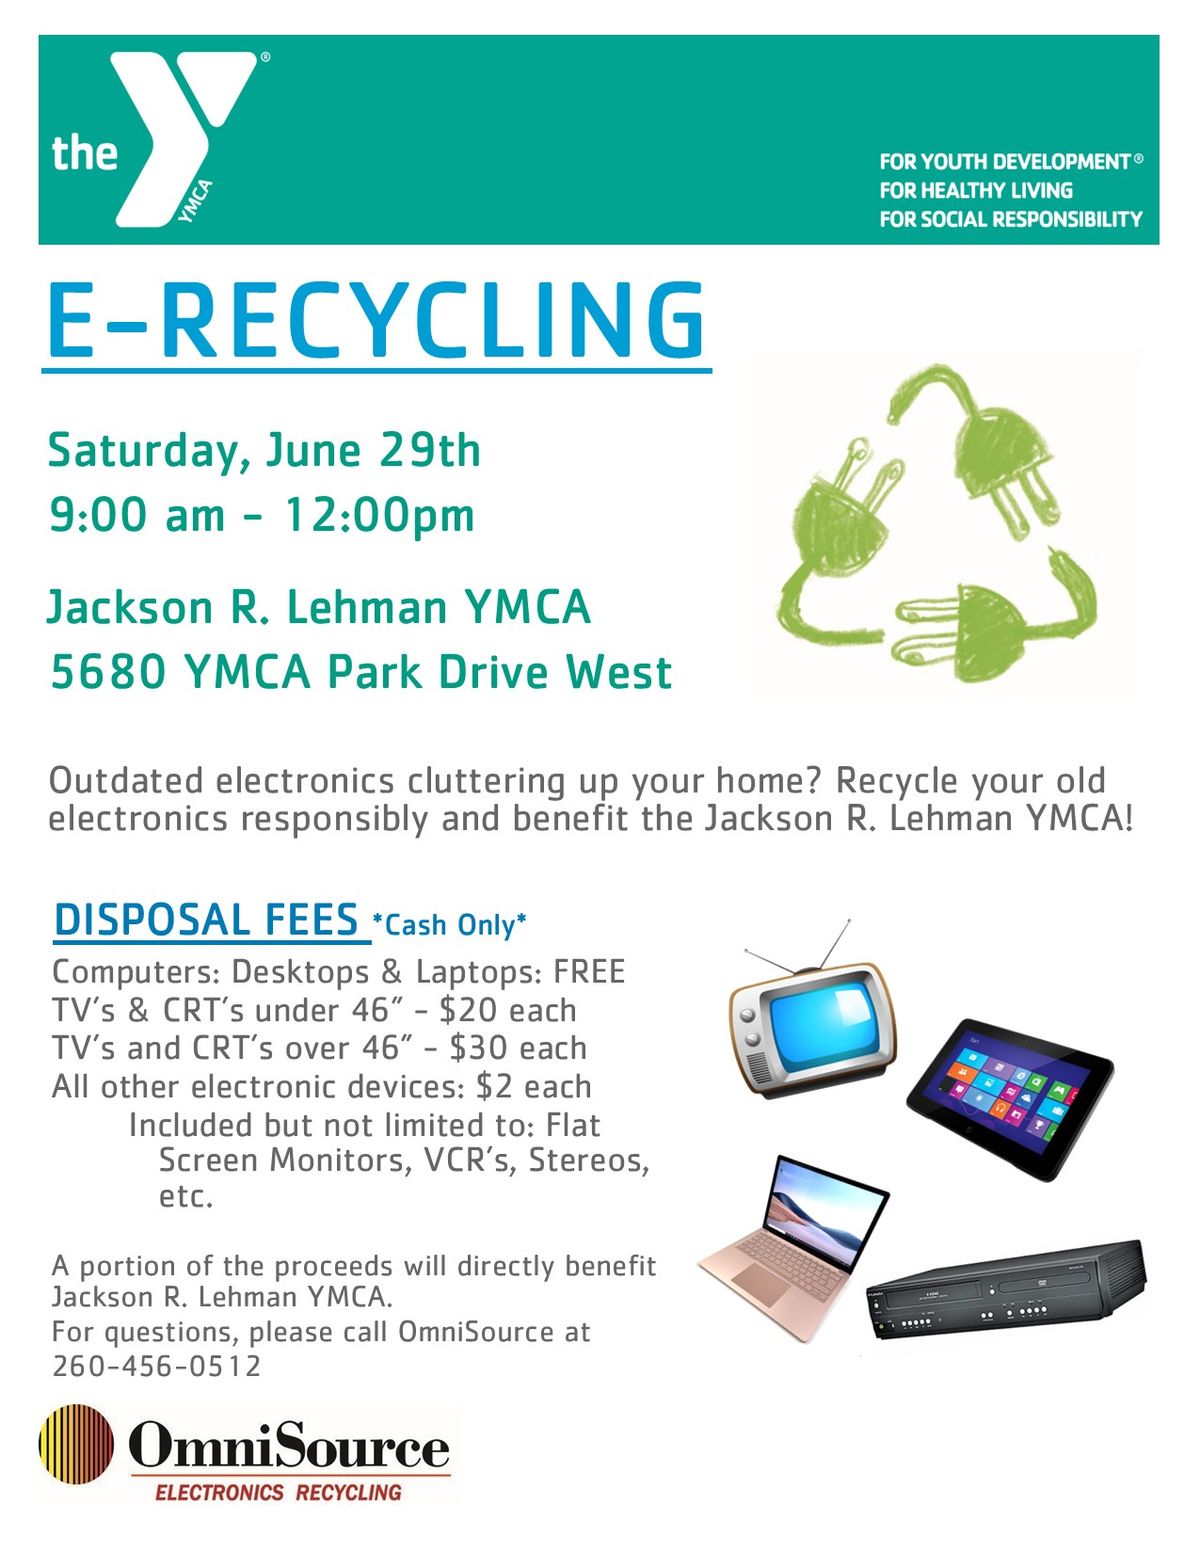 E-Recycling with OmniSource